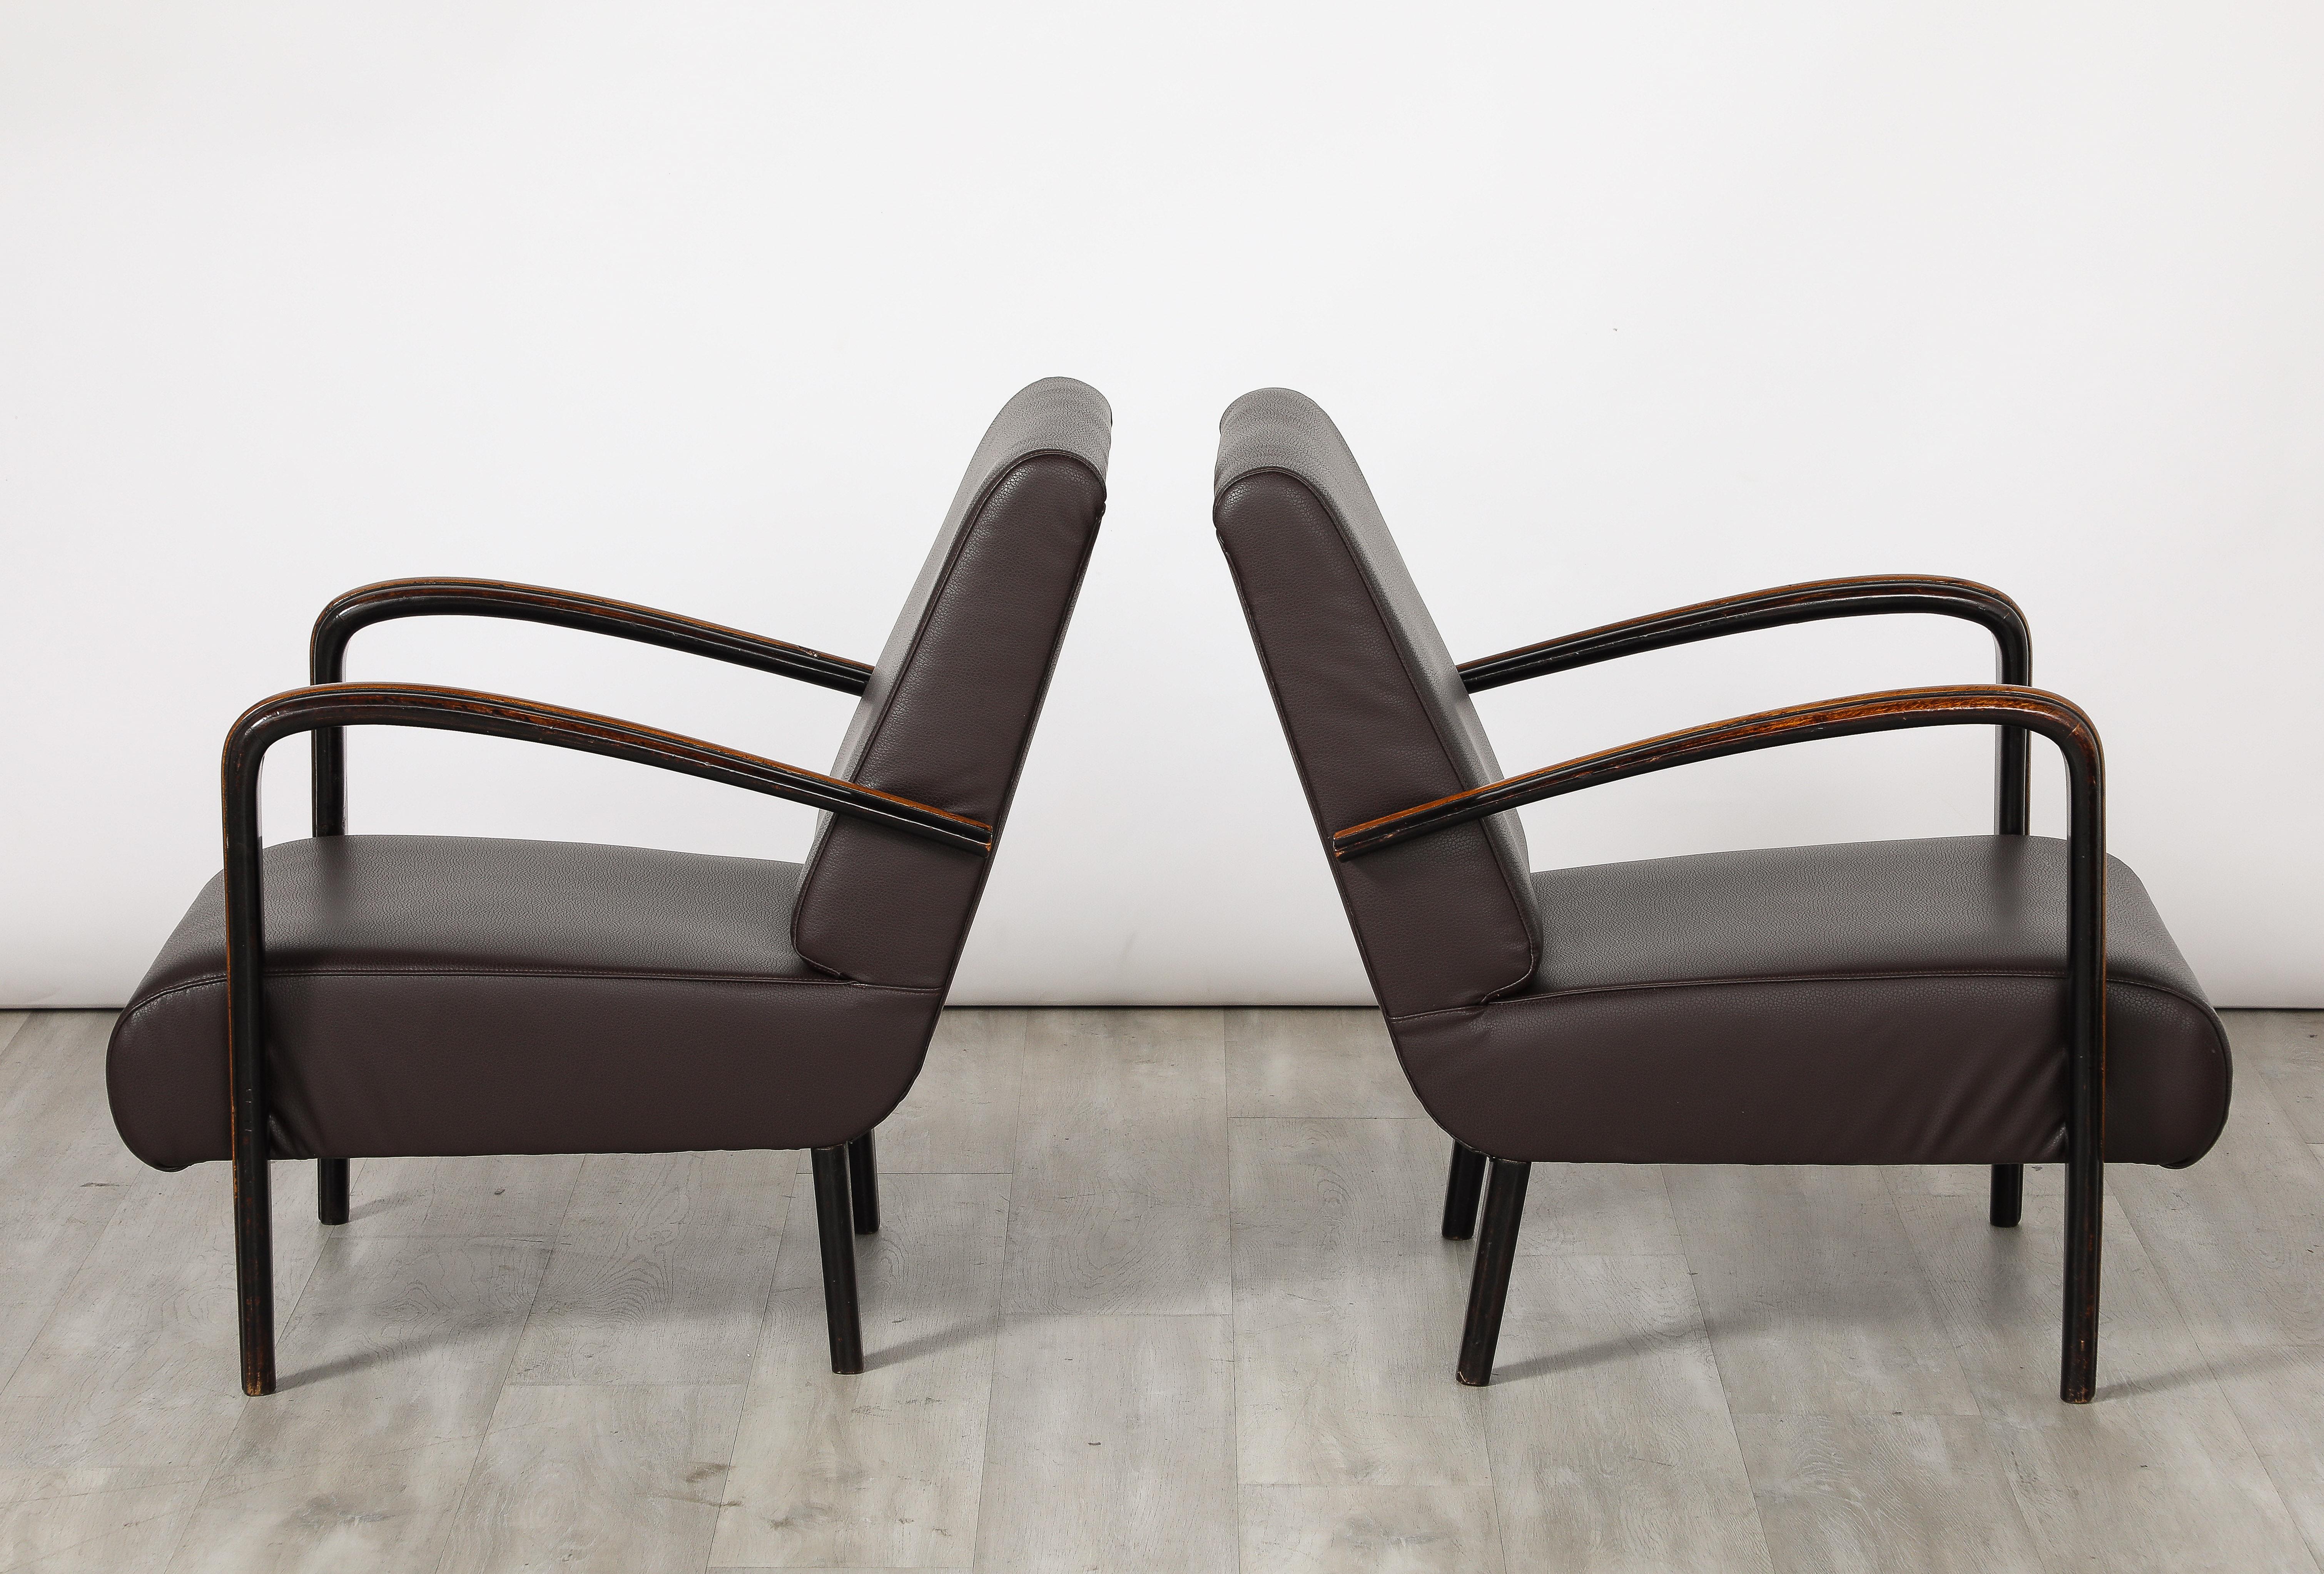 Pair of Italian Modernist Lounge Chairs, Italy, circa 1940 For Sale 2